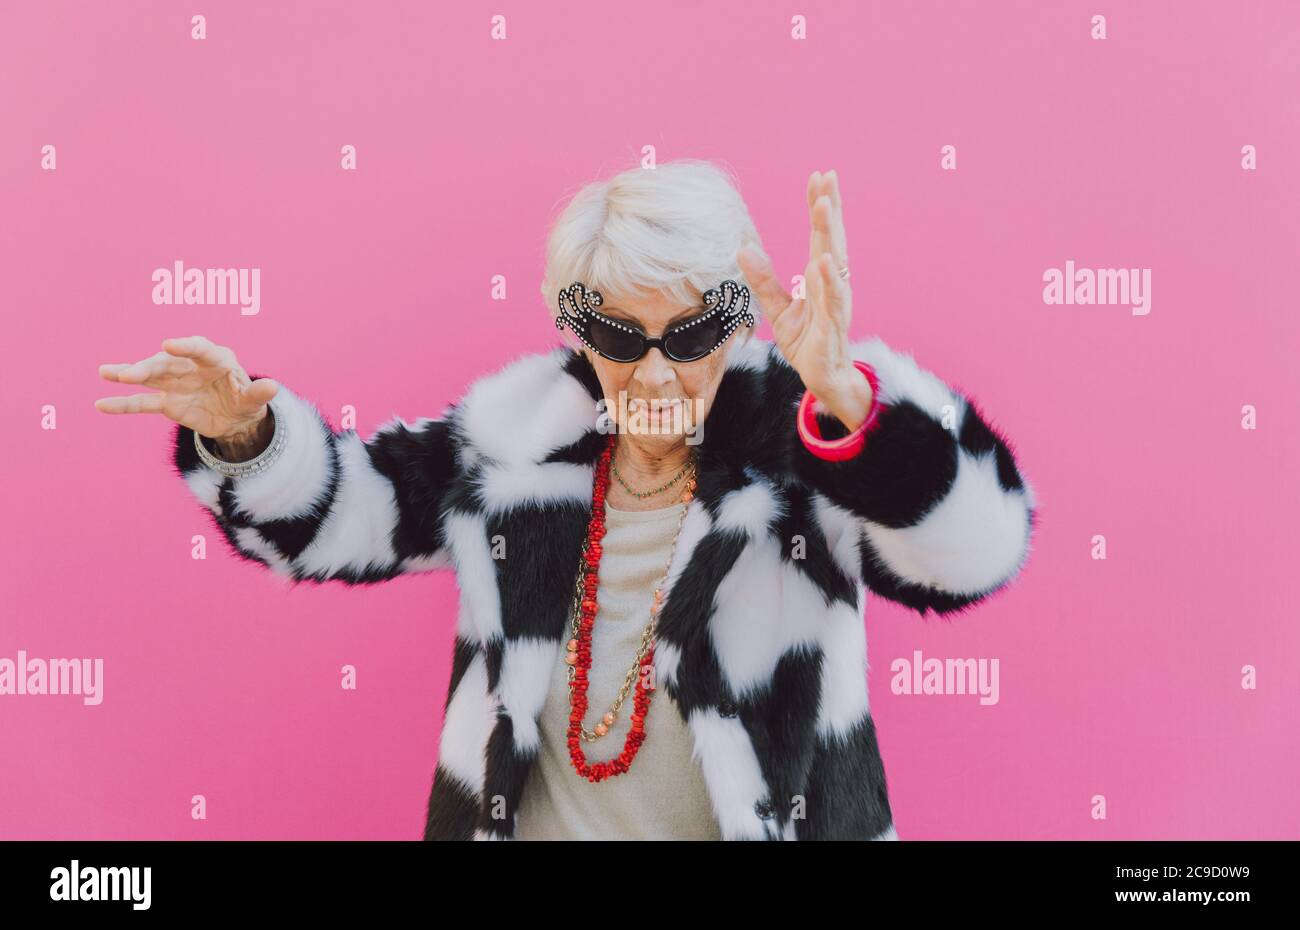 Funny grandmother dancing on colored background Stock Photo - Alamy